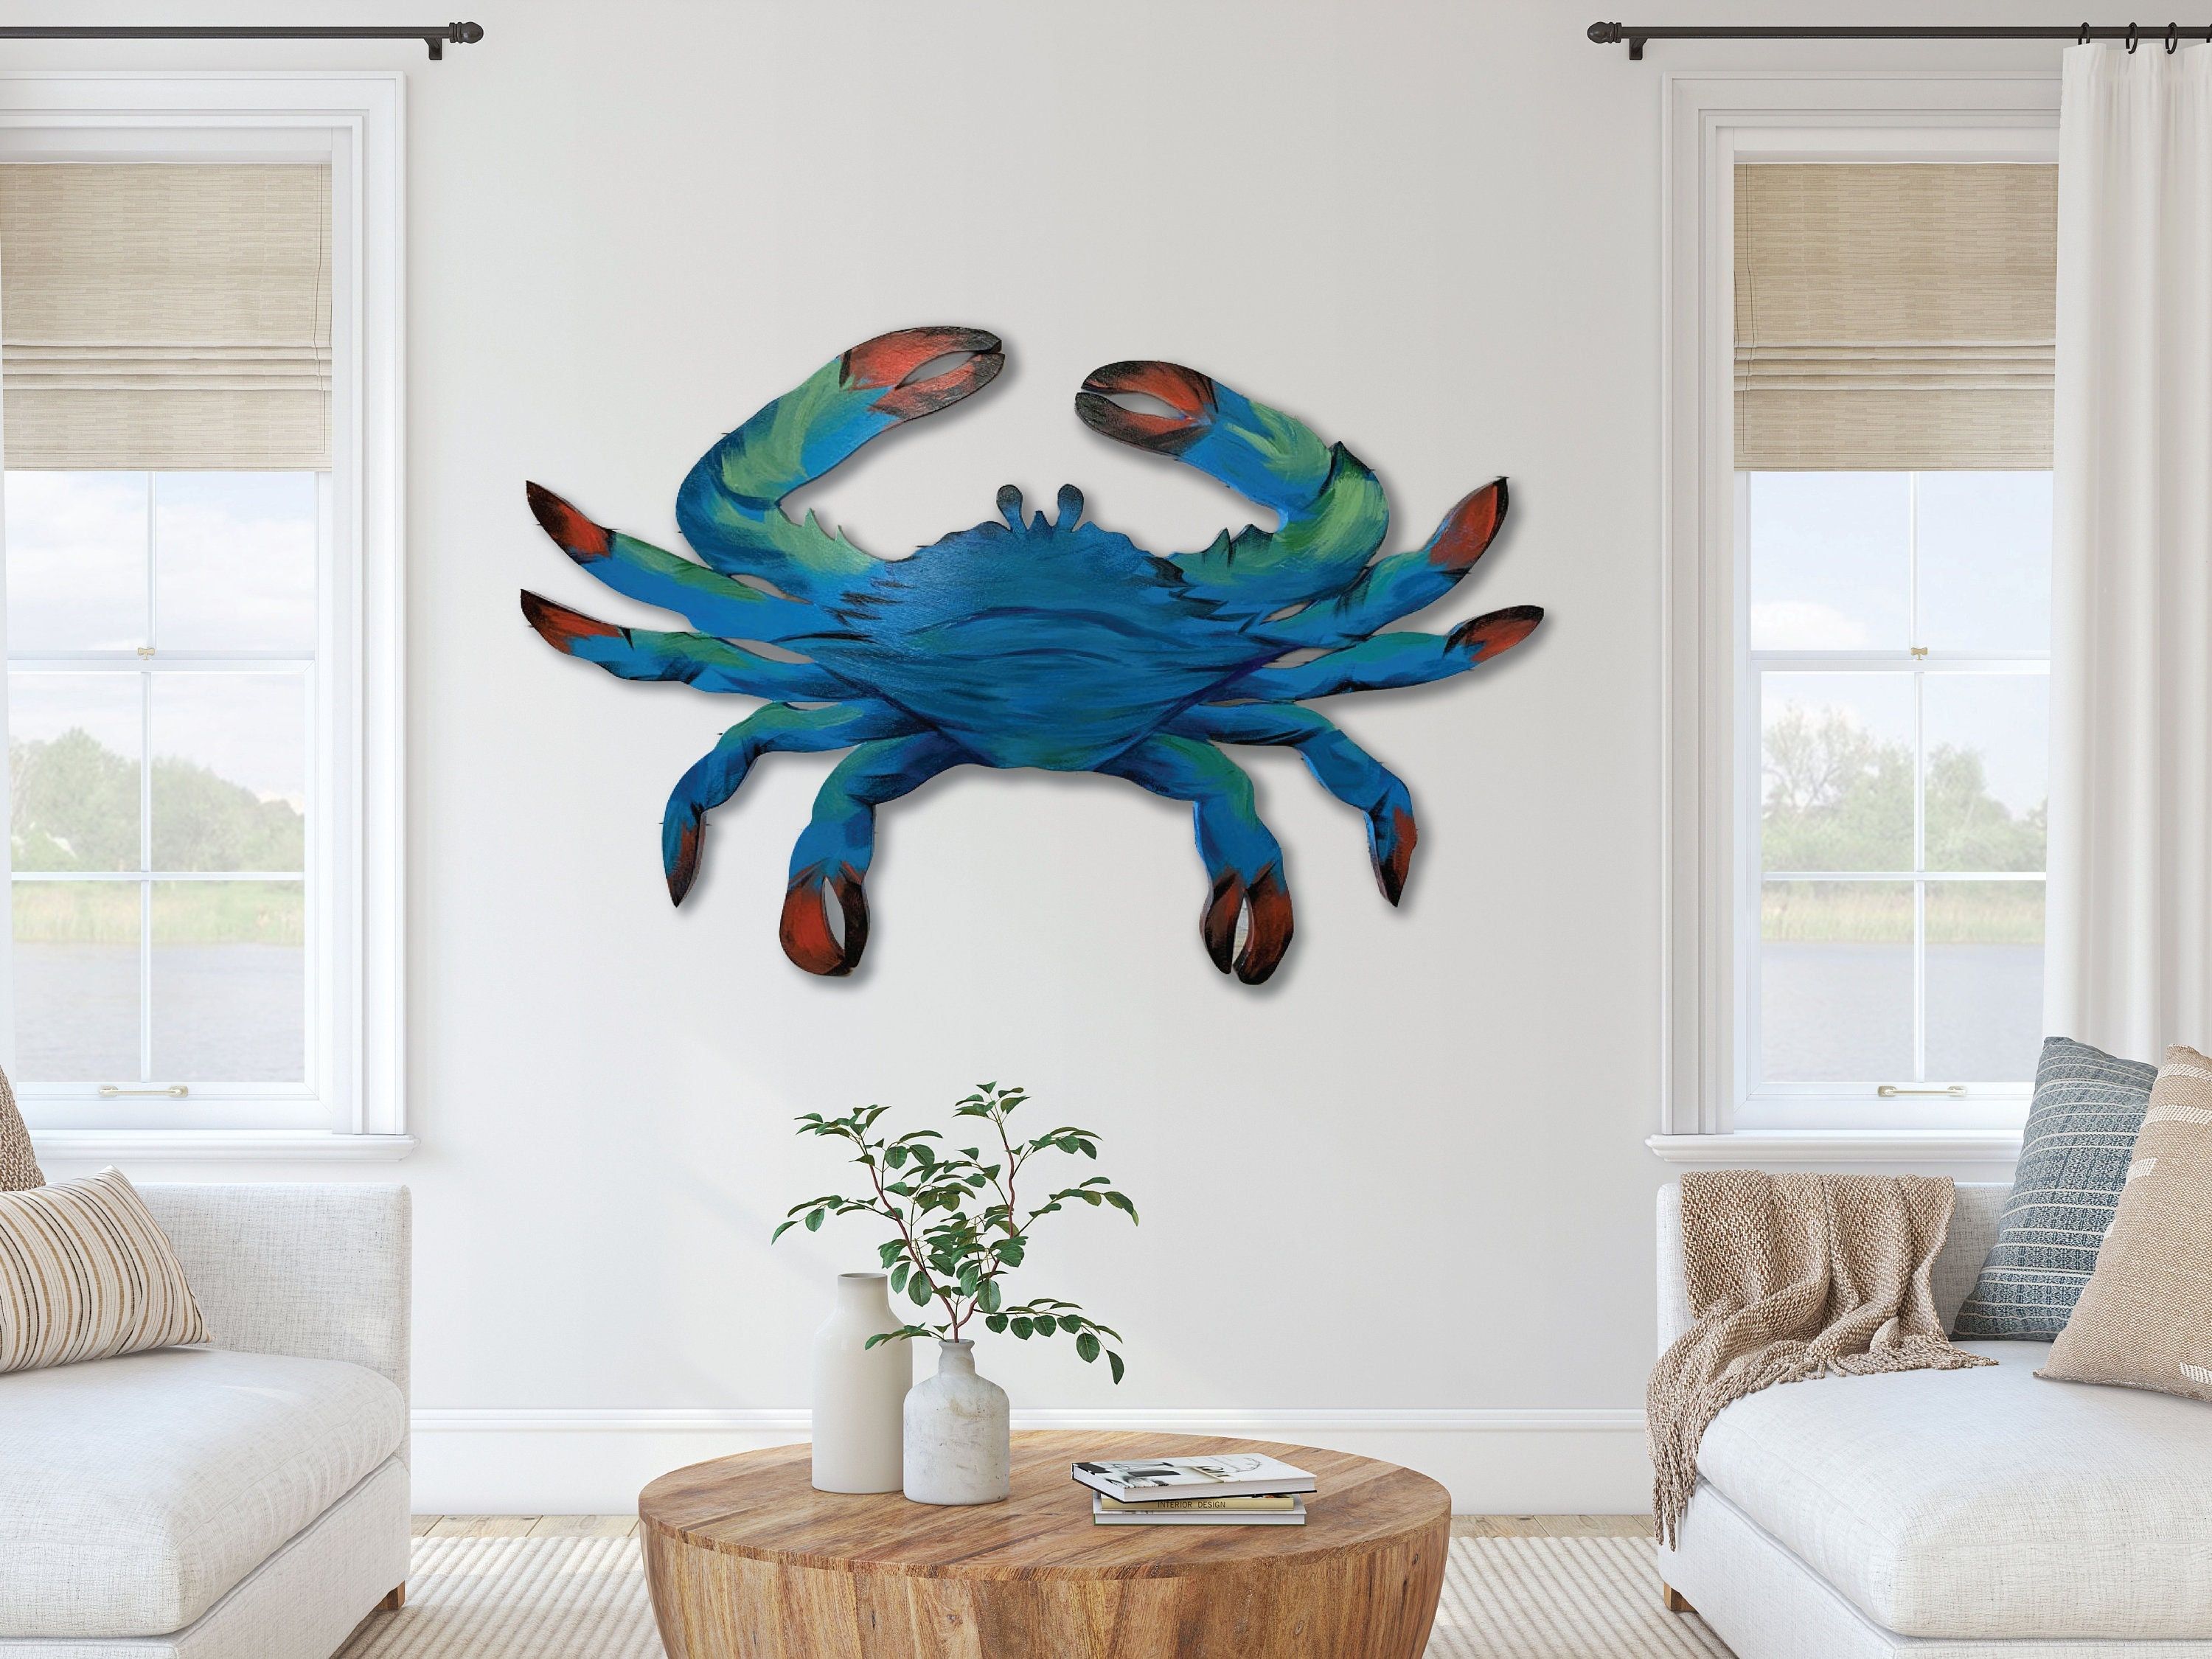 Blue Crab Outdoor Decor Gift For Him. Patio Bar Crab Wall Art (View 14 of 15)